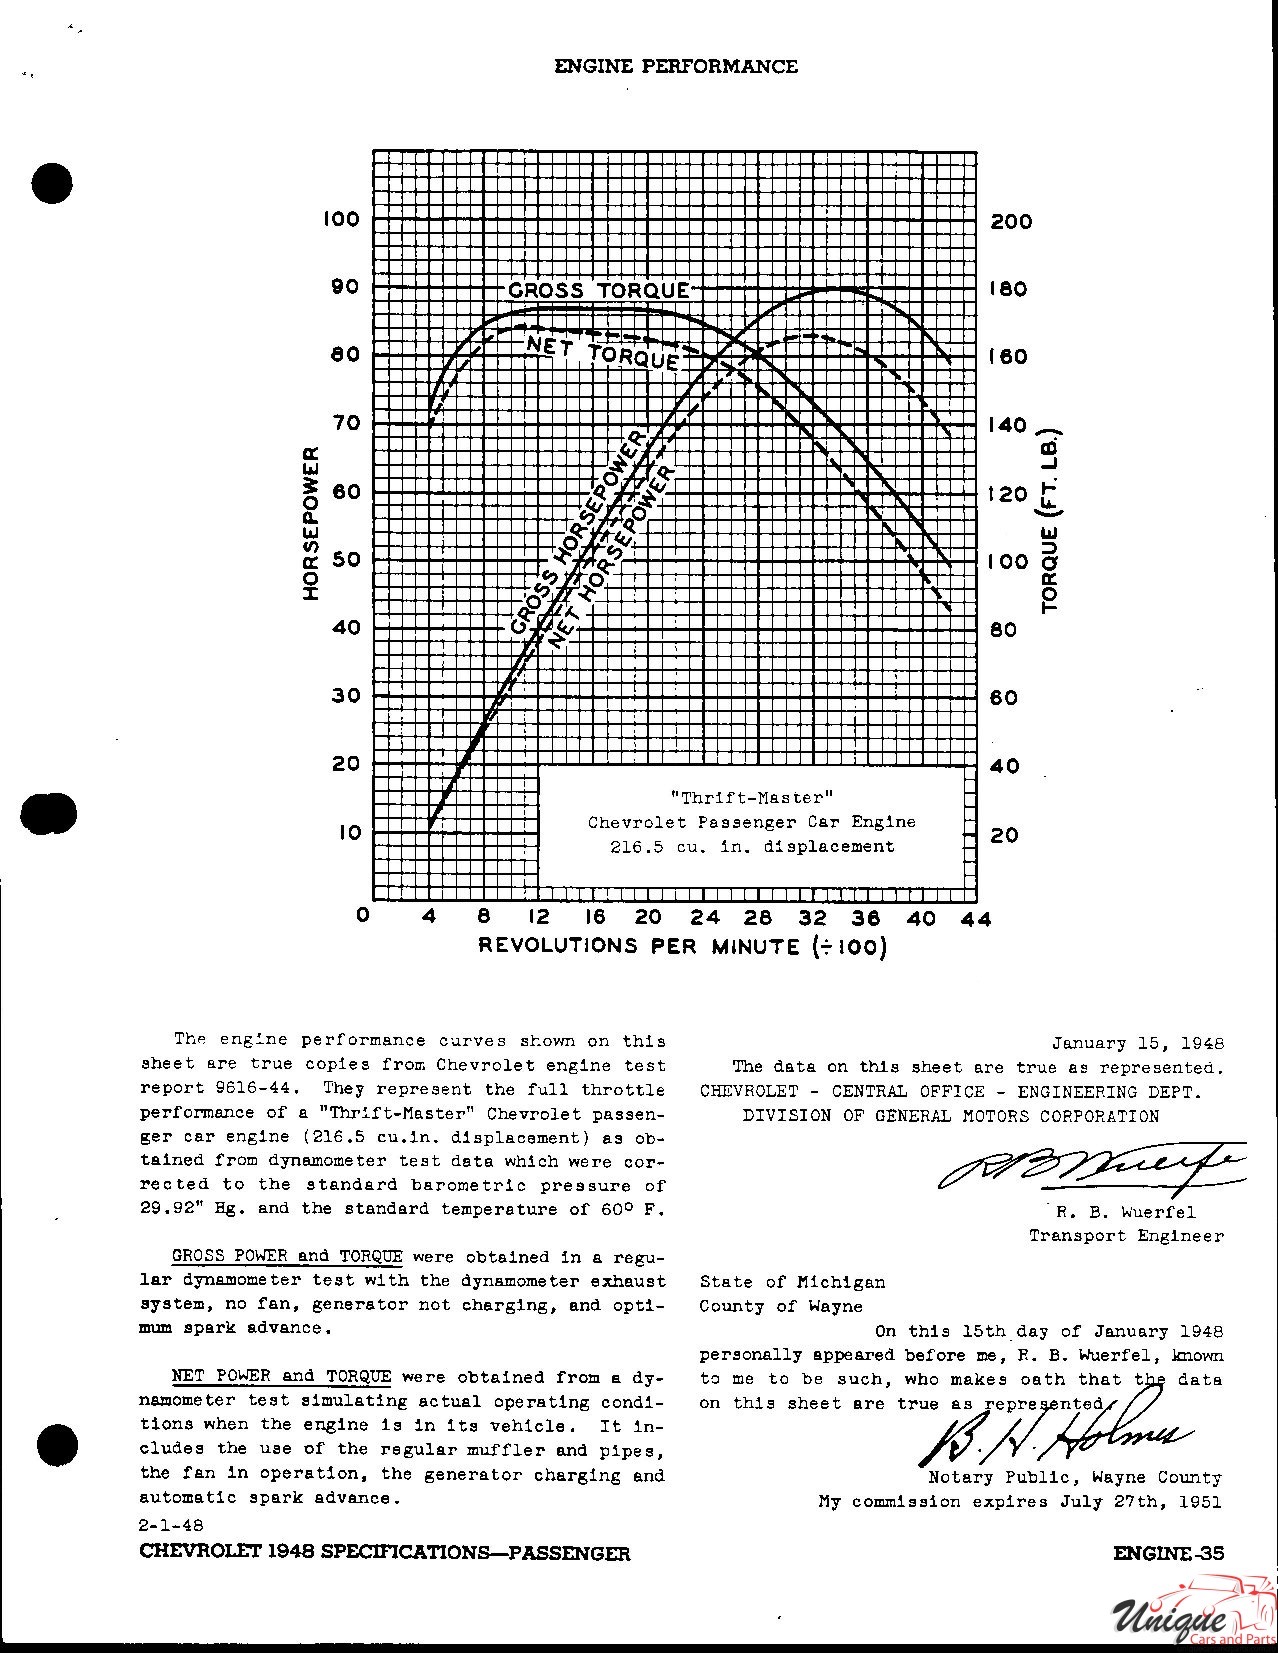 1948 Chevrolet Specifications Page 7